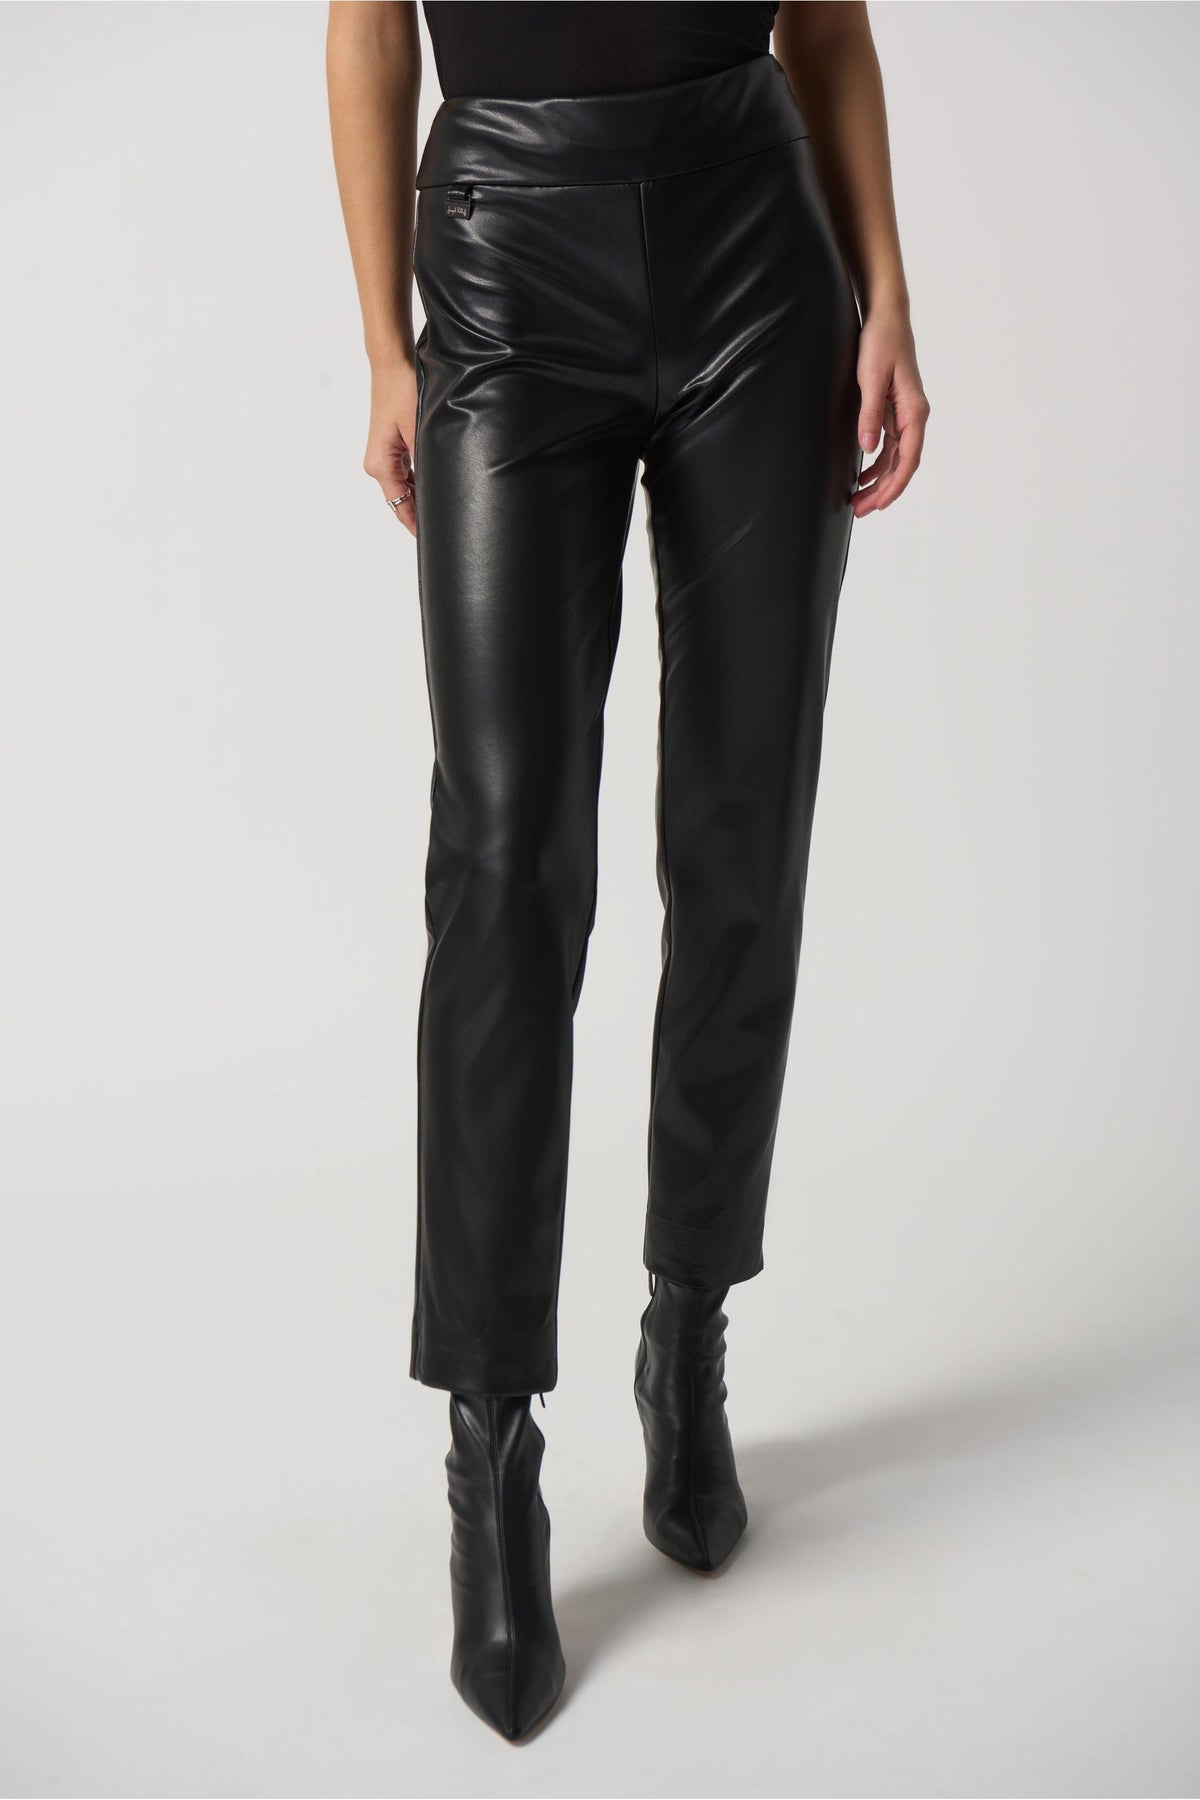 Joseph Ribkoff Faux Leather Pant - Style 223196, front